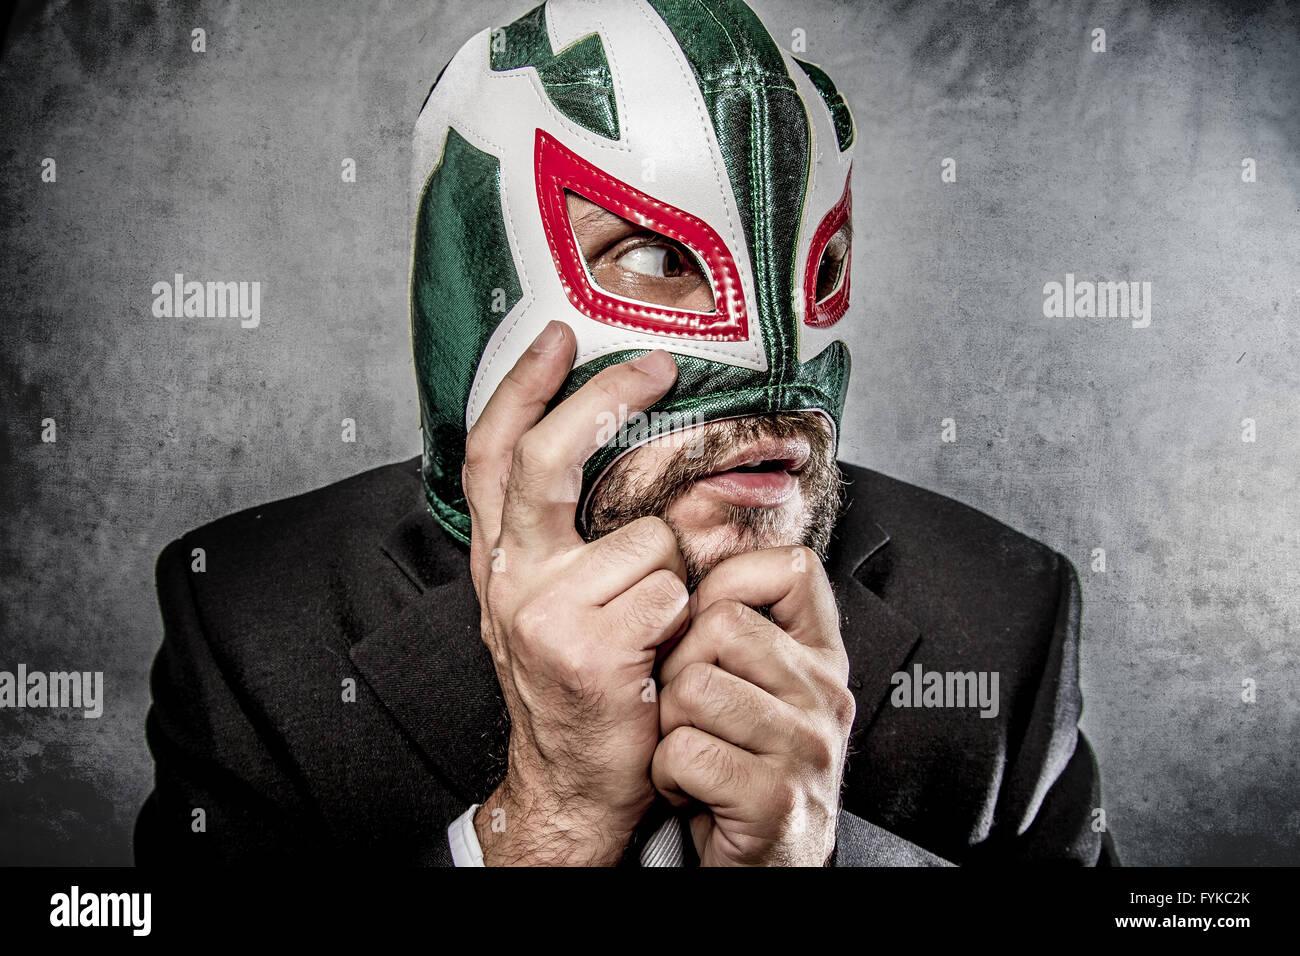 Stress, businessman angry with Mexican wrestler mask Stock Photo